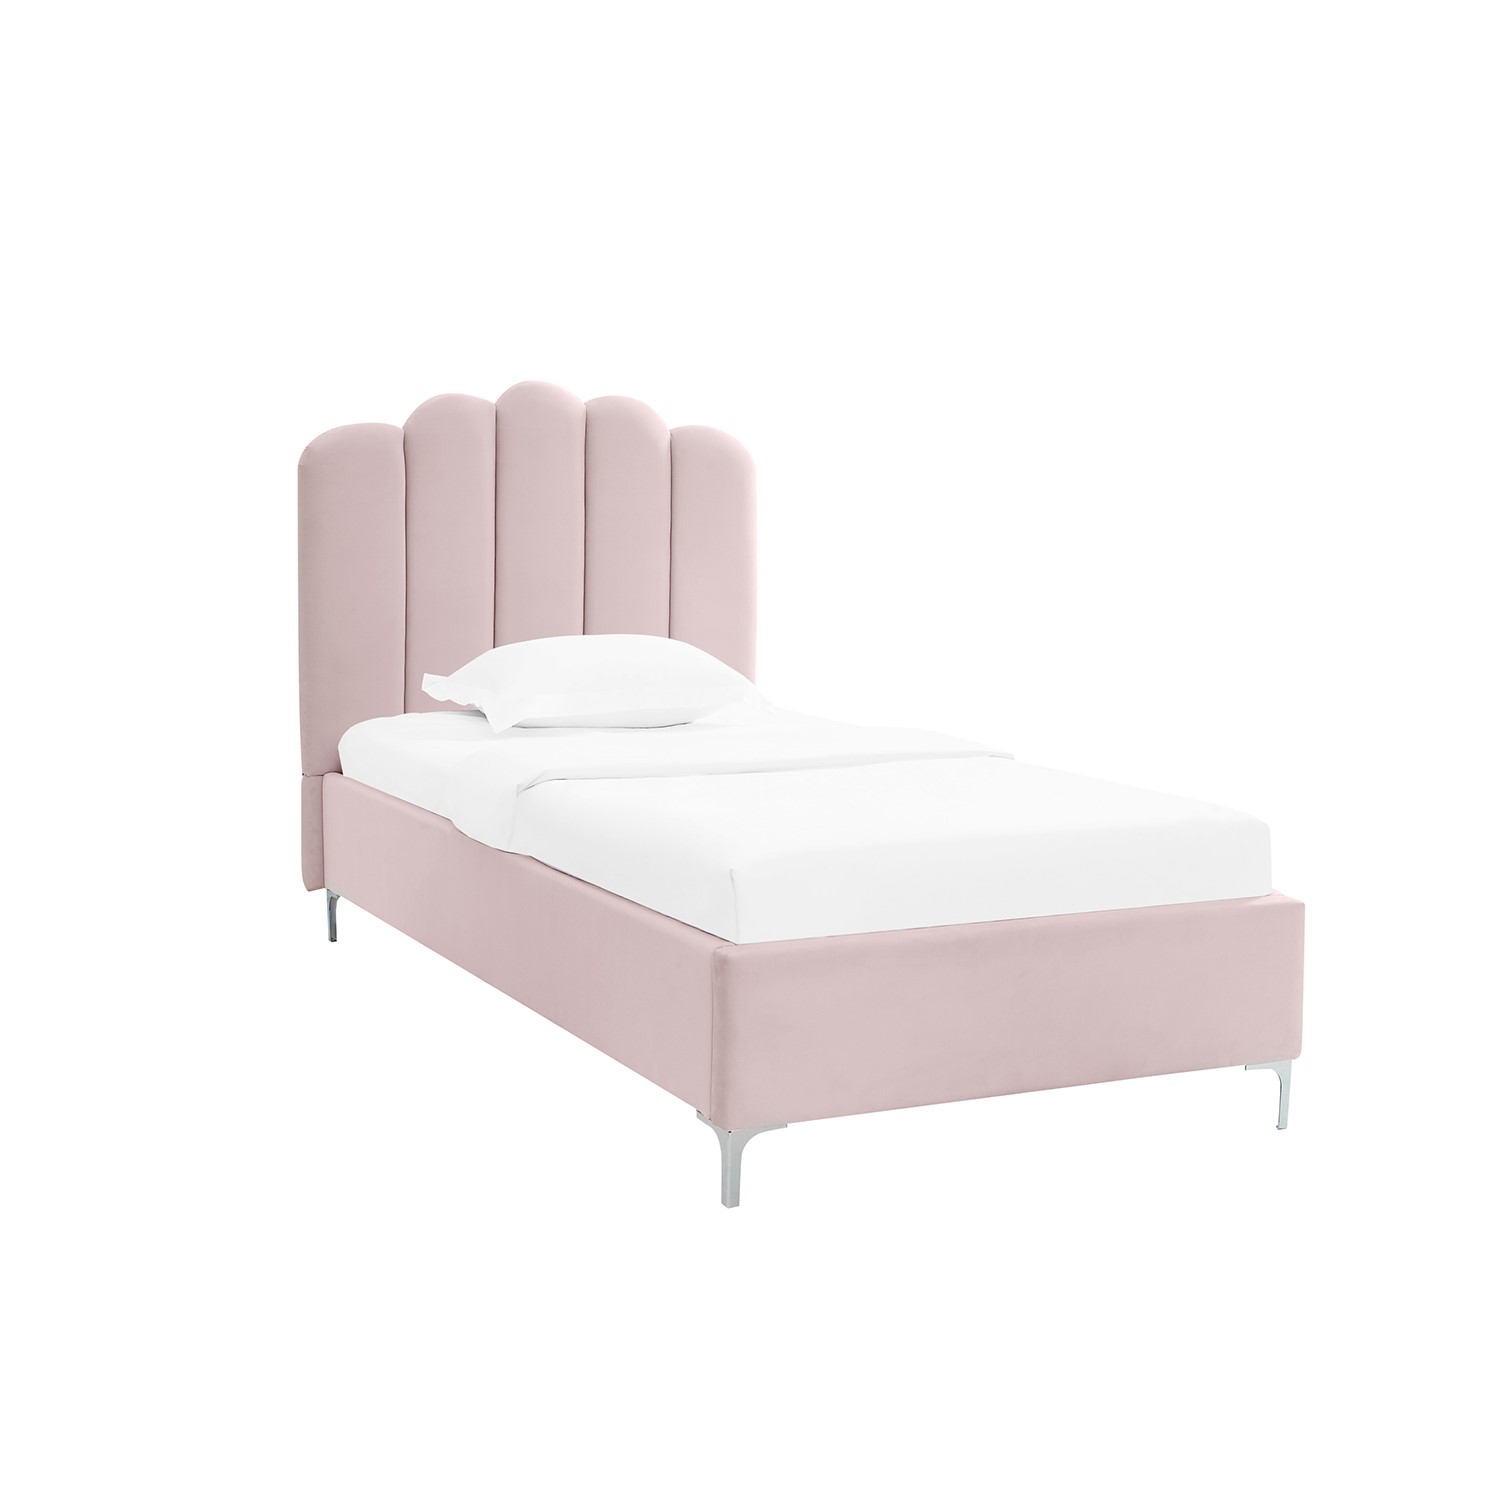 Photo of Lpd pink velvet single bed - willow